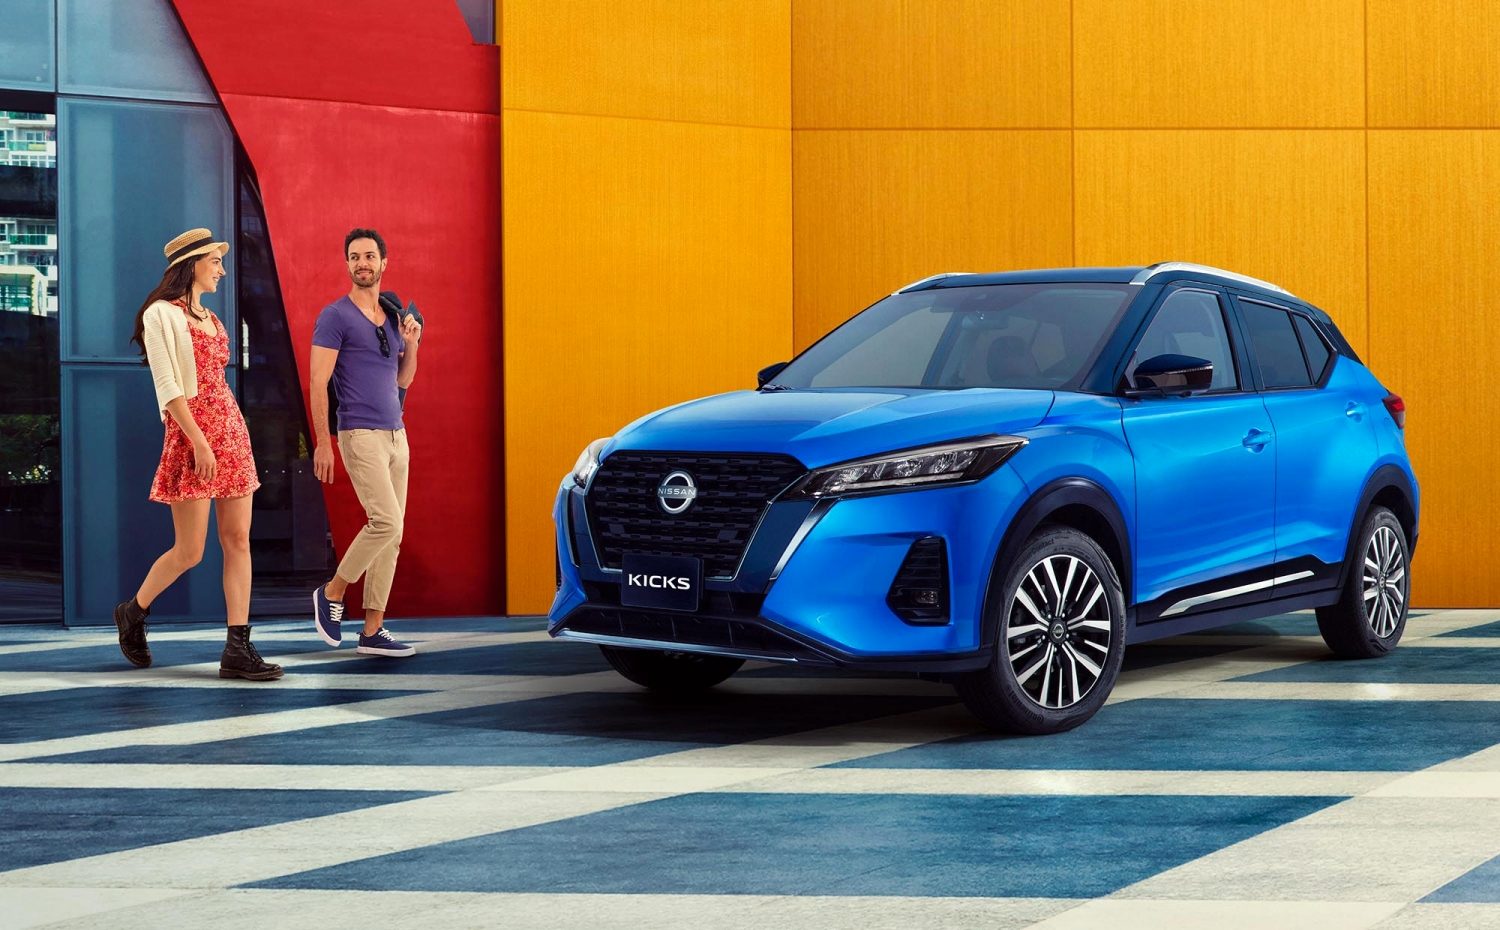 Nissan Kicks will be the first car with e-Power in Mexico